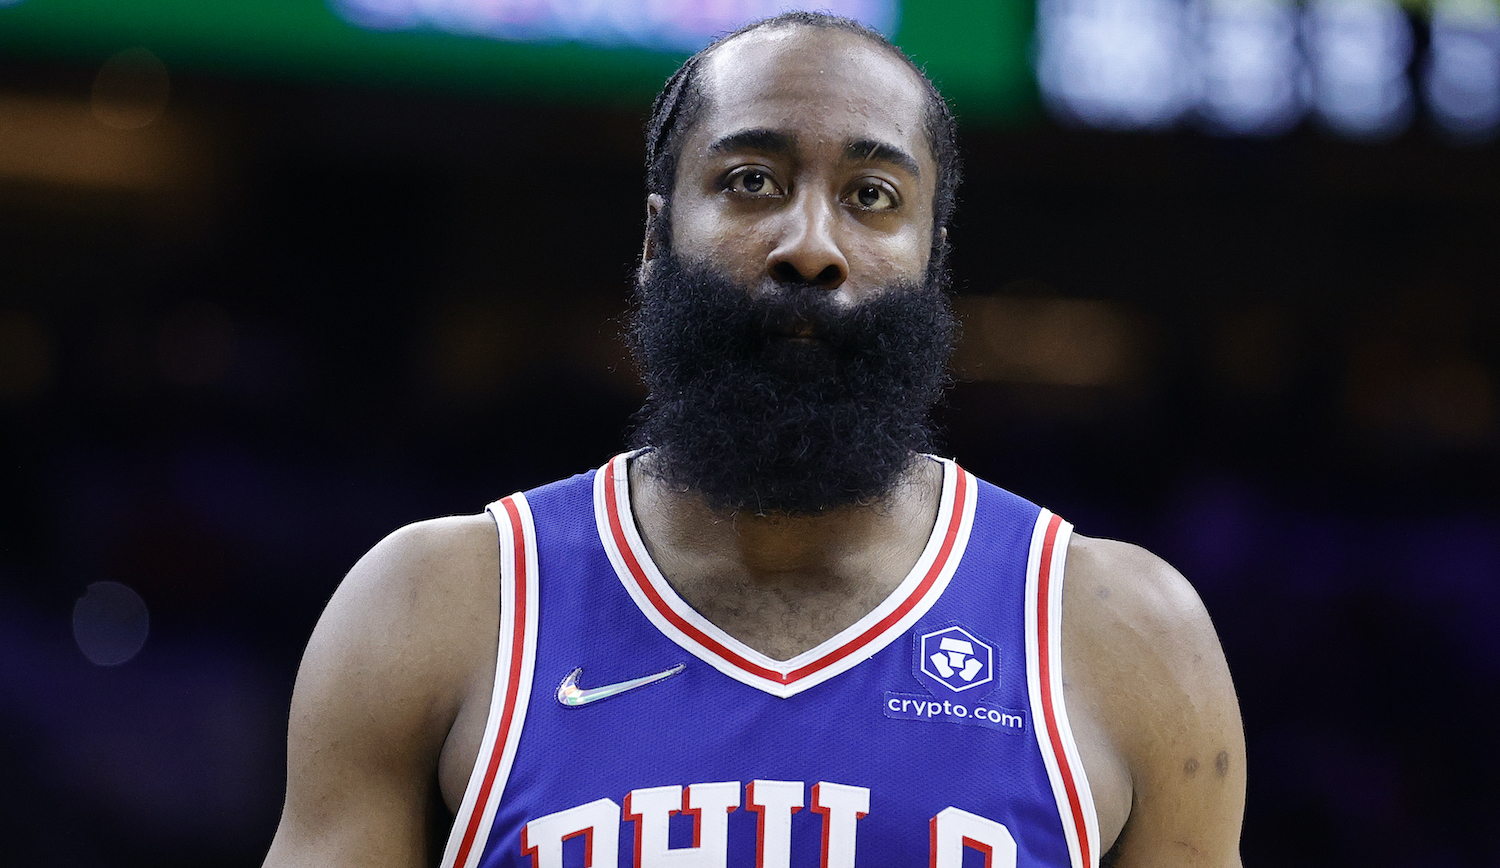 PHILADELPHIA, PENNSYLVANIA - APRIL 25: James Harden #1 of the Philadelphia 76ers look on in the third quarter against the Toronto Raptors during Game Five of the Eastern Conference First Round at Wells Fargo Center on April 25, 2022 in Philadelphia, Pennsylvania. NOTE TO USER: User expressly acknowledges and agrees that, by downloading and or using this photograph, User is consenting to the terms and conditions of the Getty Images License Agreement. (Photo by Tim Nwachukwu/Getty Images)